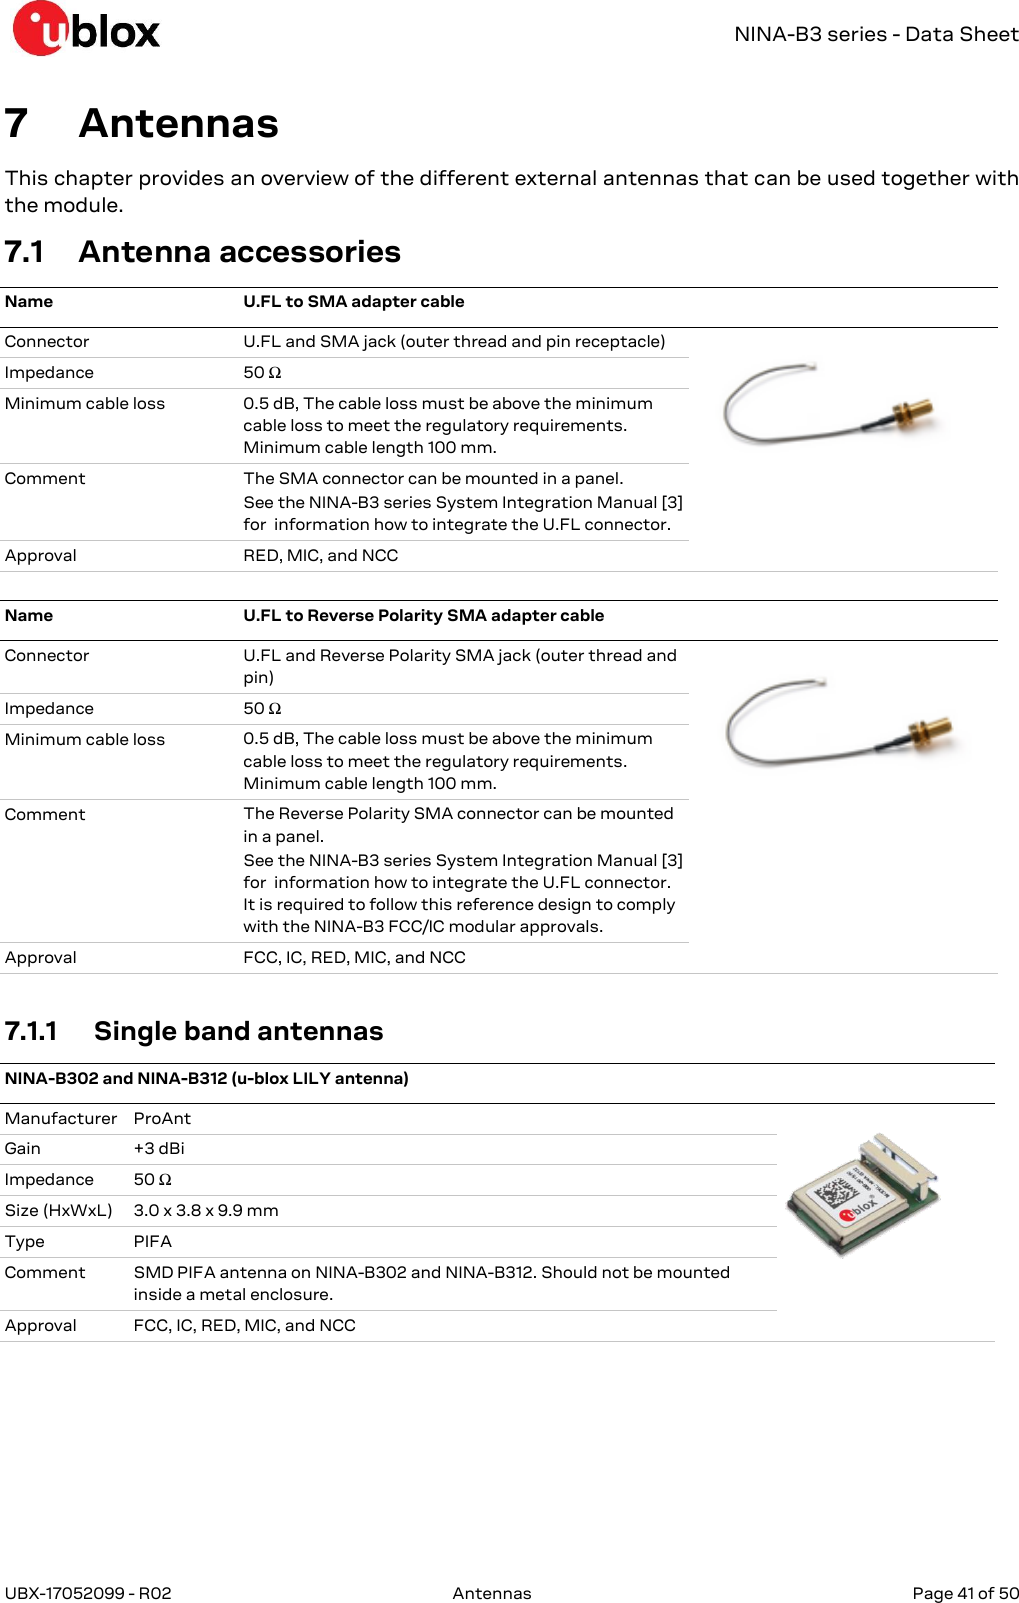   NINA-B3 series - Data Sheet UBX-17052099 - R02  Antennas   Page 41 of 50      7 Antennas This chapter provides an overview of the different external antennas that can be used together with the module. 7.1 Antenna accessories Name U.FL to SMA adapter cable  Connector U.FL and SMA jack (outer thread and pin receptacle)  Impedance 50 Ω Minimum cable loss 0.5 dB, The cable loss must be above the minimum cable loss to meet the regulatory requirements. Minimum cable length 100 mm. Comment The SMA connector can be mounted in a panel. See the NINA-B3 series System Integration Manual [3] for  information how to integrate the U.FL connector. Approval RED, MIC, and NCC   Name U.FL to Reverse Polarity SMA adapter cable  Connector U.FL and Reverse Polarity SMA jack (outer thread and pin)  Impedance 50 Ω Minimum cable loss 0.5 dB, The cable loss must be above the minimum cable loss to meet the regulatory requirements. Minimum cable length 100 mm. Comment The Reverse Polarity SMA connector can be mounted in a panel.  See the NINA-B3 series System Integration Manual [3] for  information how to integrate the U.FL connector. It is required to follow this reference design to comply with the NINA-B3 FCC/IC modular approvals. Approval FCC, IC, RED, MIC, and NCC  7.1.1 Single band antennas NINA-B302 and NINA-B312 (u-blox LILY antenna)  Manufacturer ProAnt   Gain +3 dBi Impedance 50 Ω Size (HxWxL) 3.0 x 3.8 x 9.9 mm Type PIFA Comment SMD PIFA antenna on NINA-B302 and NINA-B312. Should not be mounted inside a metal enclosure. Approval FCC, IC, RED, MIC, and NCC  